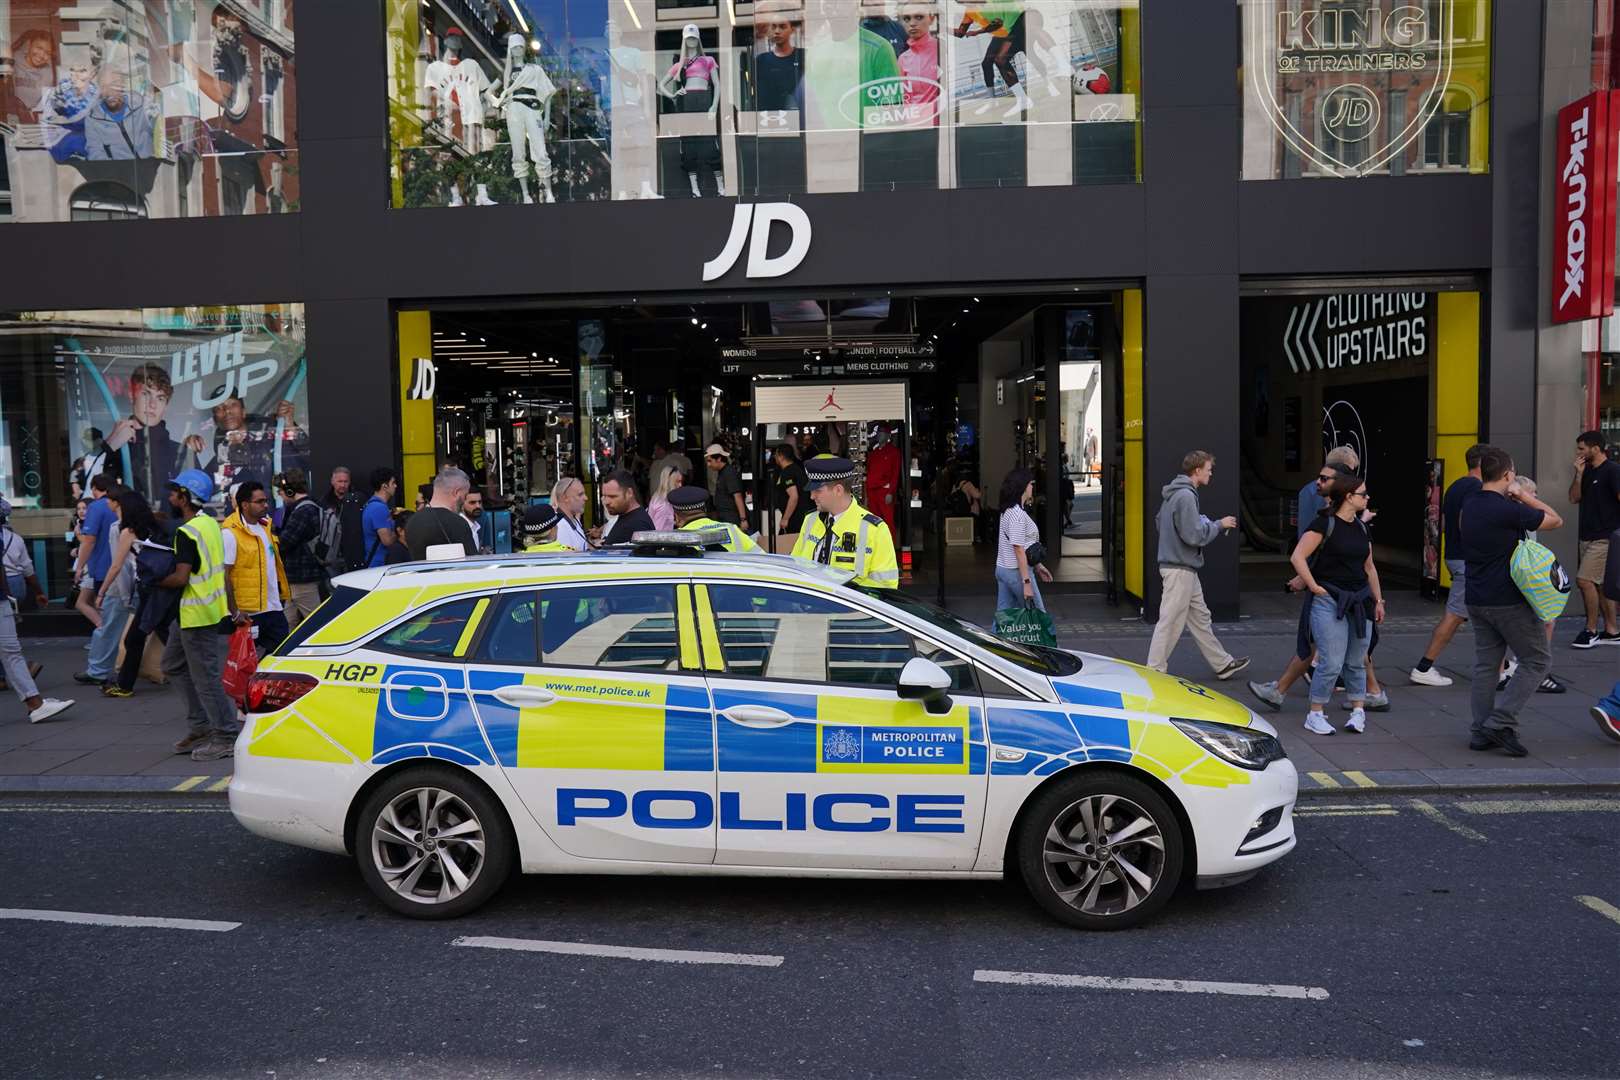 Police were called to Oxford Street earlier this month following rumours of a mass looting that began on social media